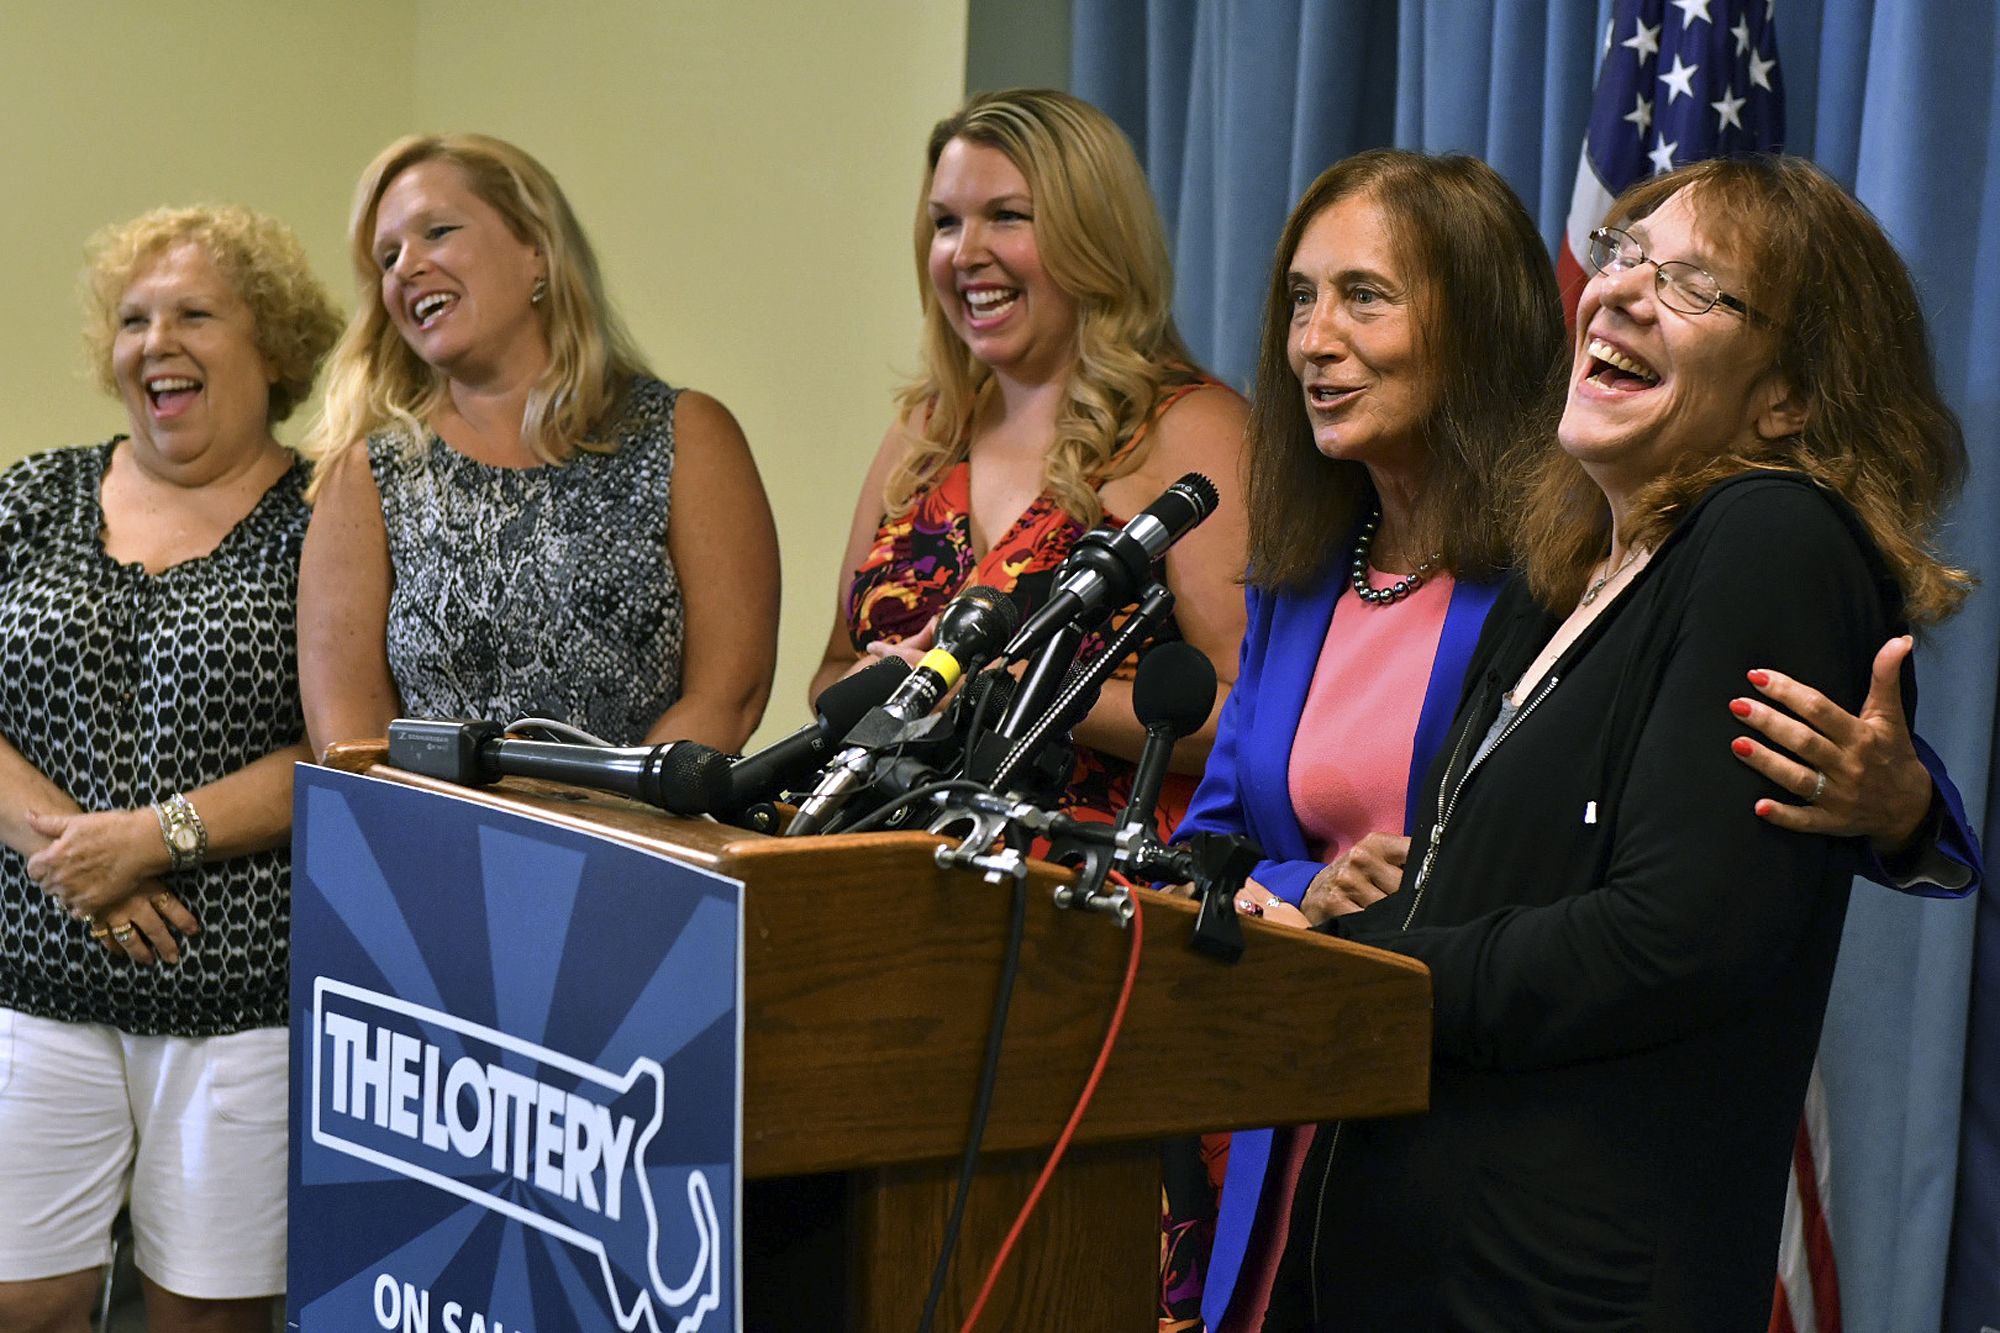 PHOTO: Mavis Wanczyk, right, of Chicopee, Mass., laughs beside state treasurer Deb Goldberg during a news conference where she claimed the $758.7 million Powerball prize at Massachusetts State Lottery headquarters, Aug. 24, 2017, in Braintree, Mass.